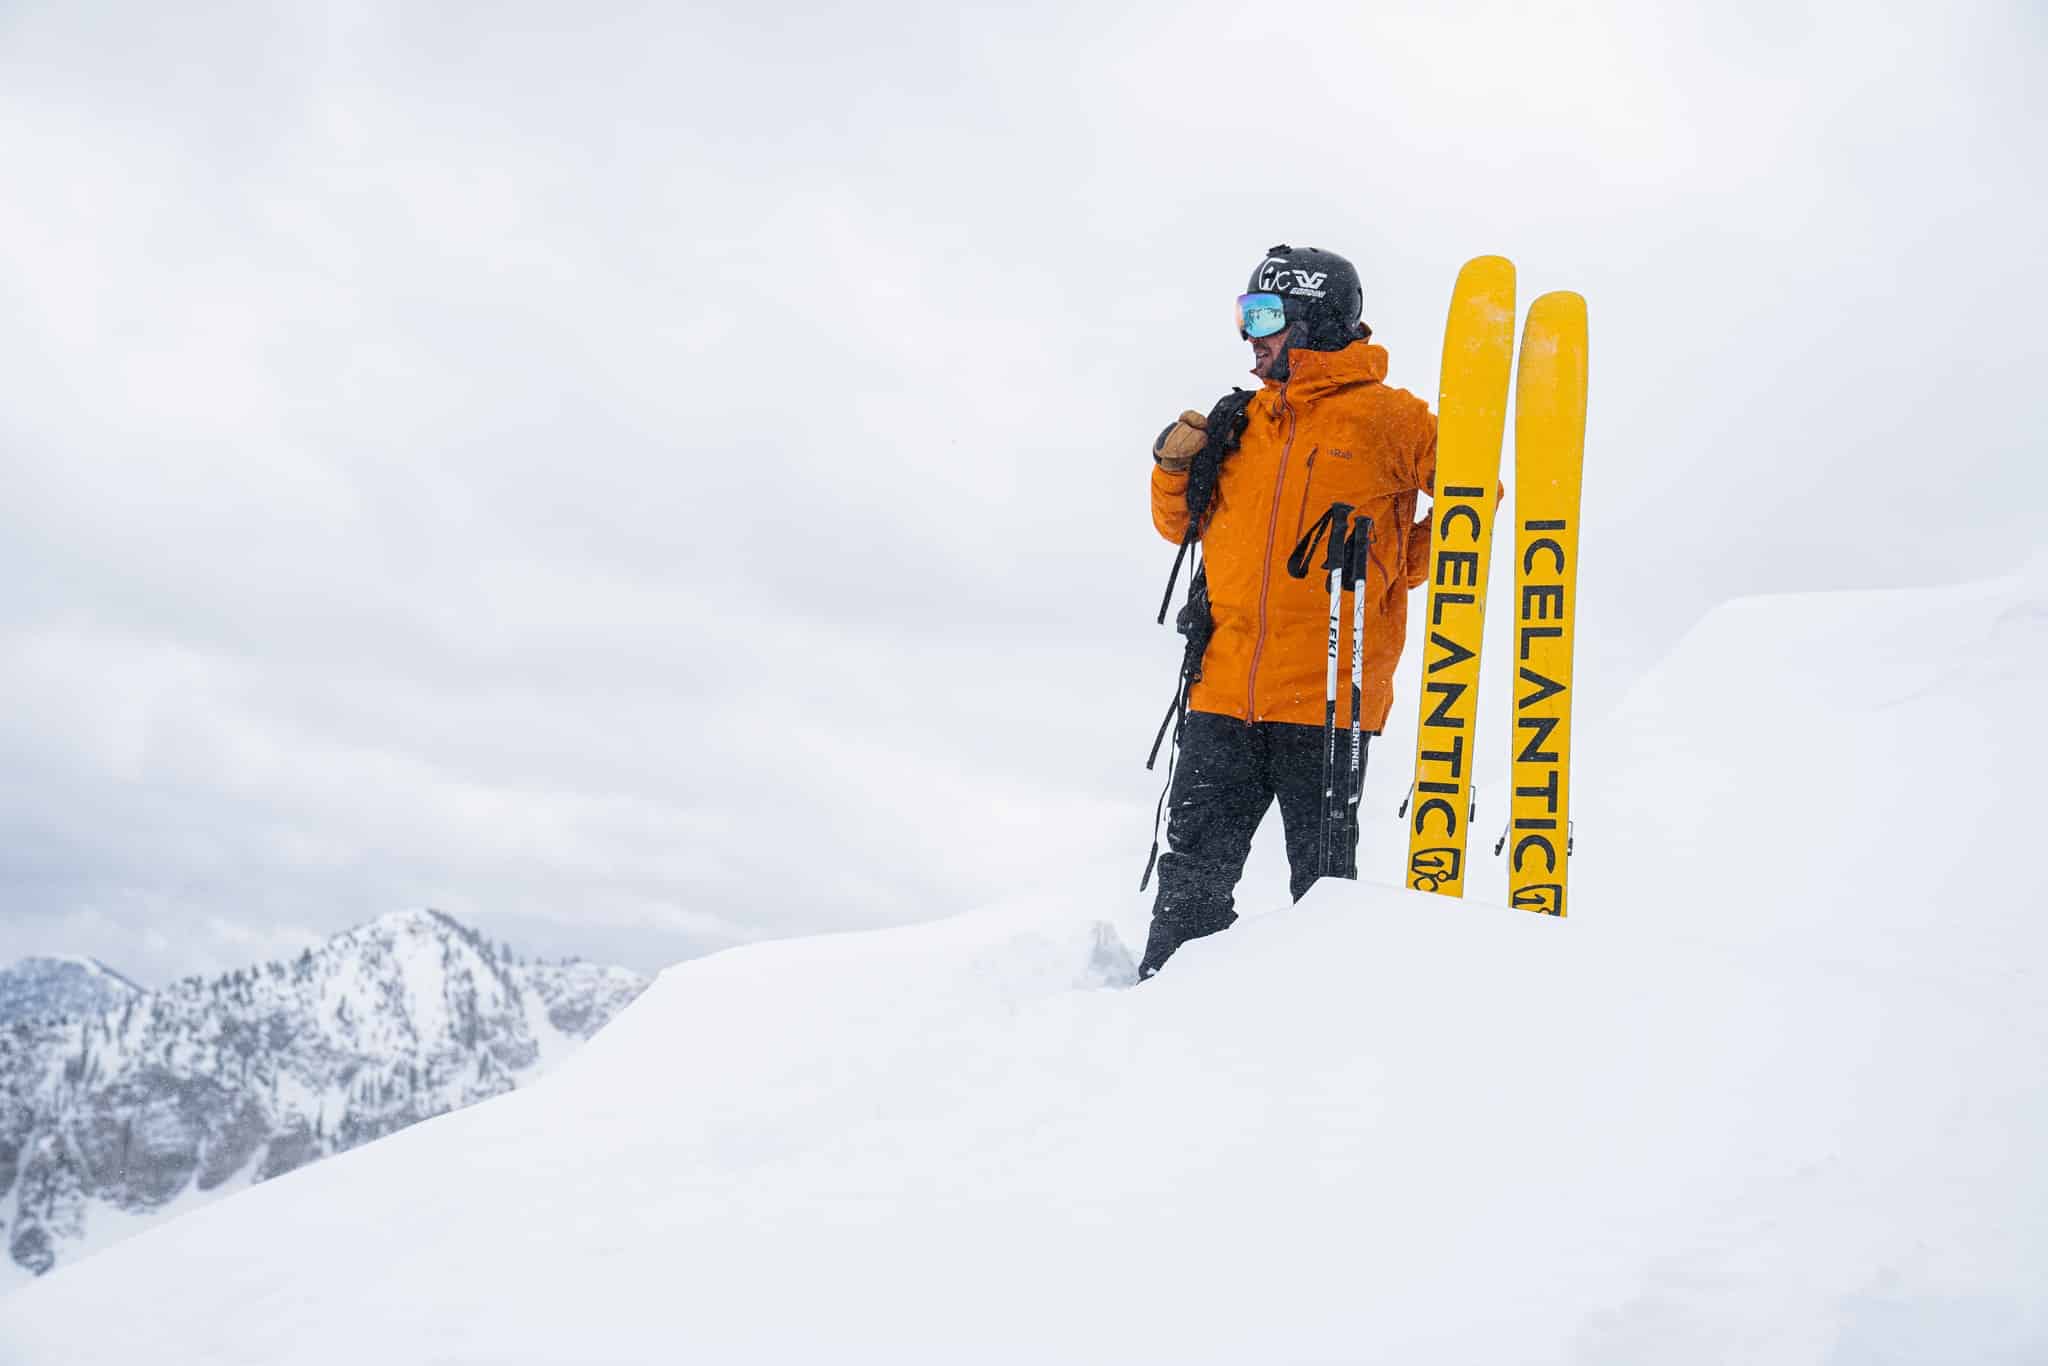 Skier in bright orange jacket standing on top of a snowy mountain next to yellow Icelantic skis